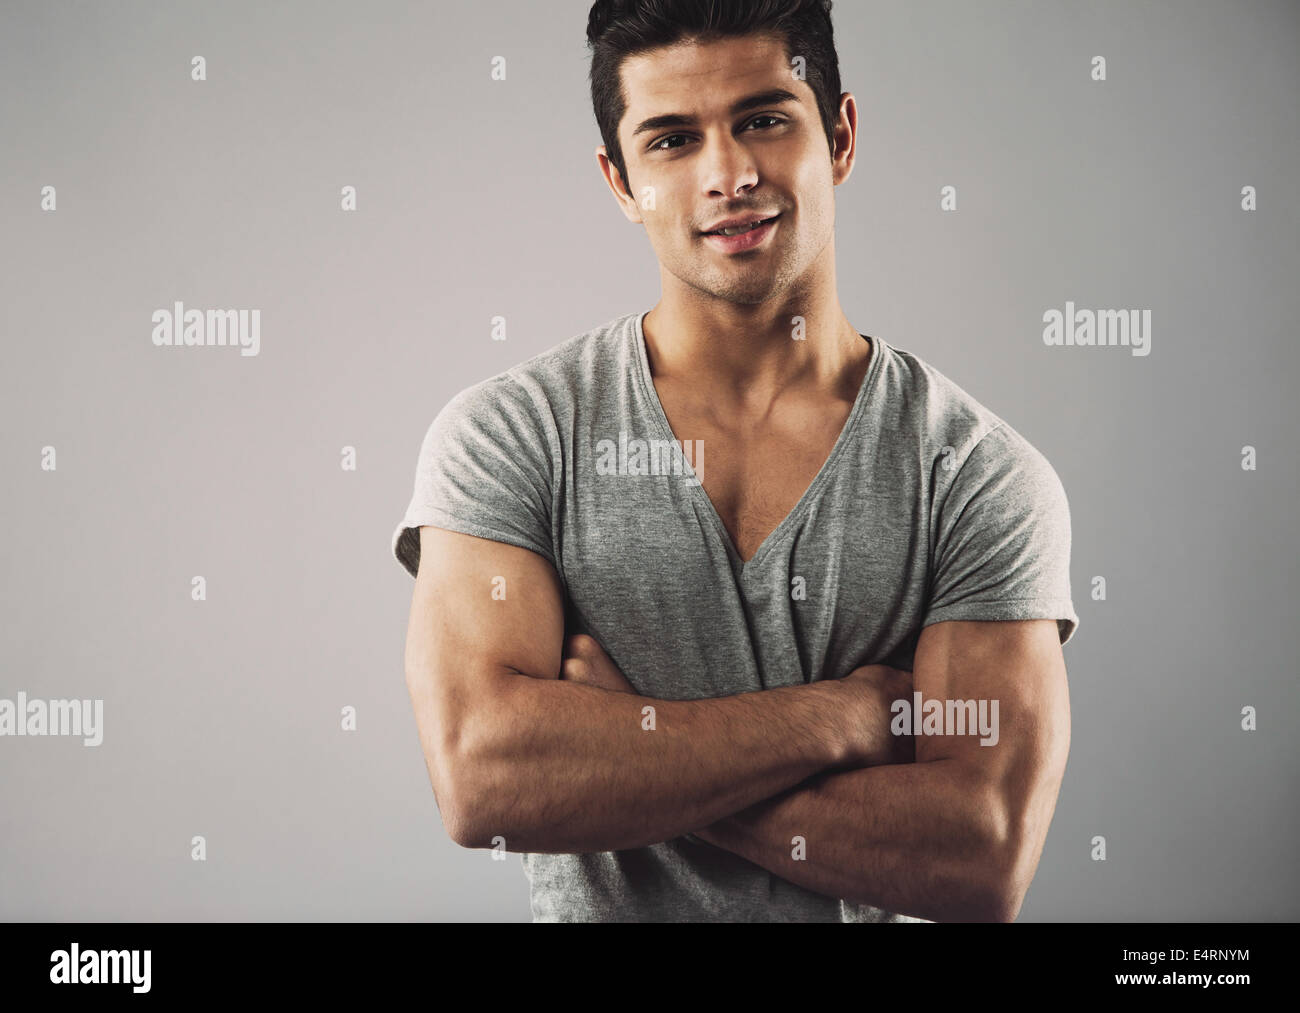 Cropped image of muscular young man standing with his arms crossed against grey background. Macho man posing confidently. Stock Photo